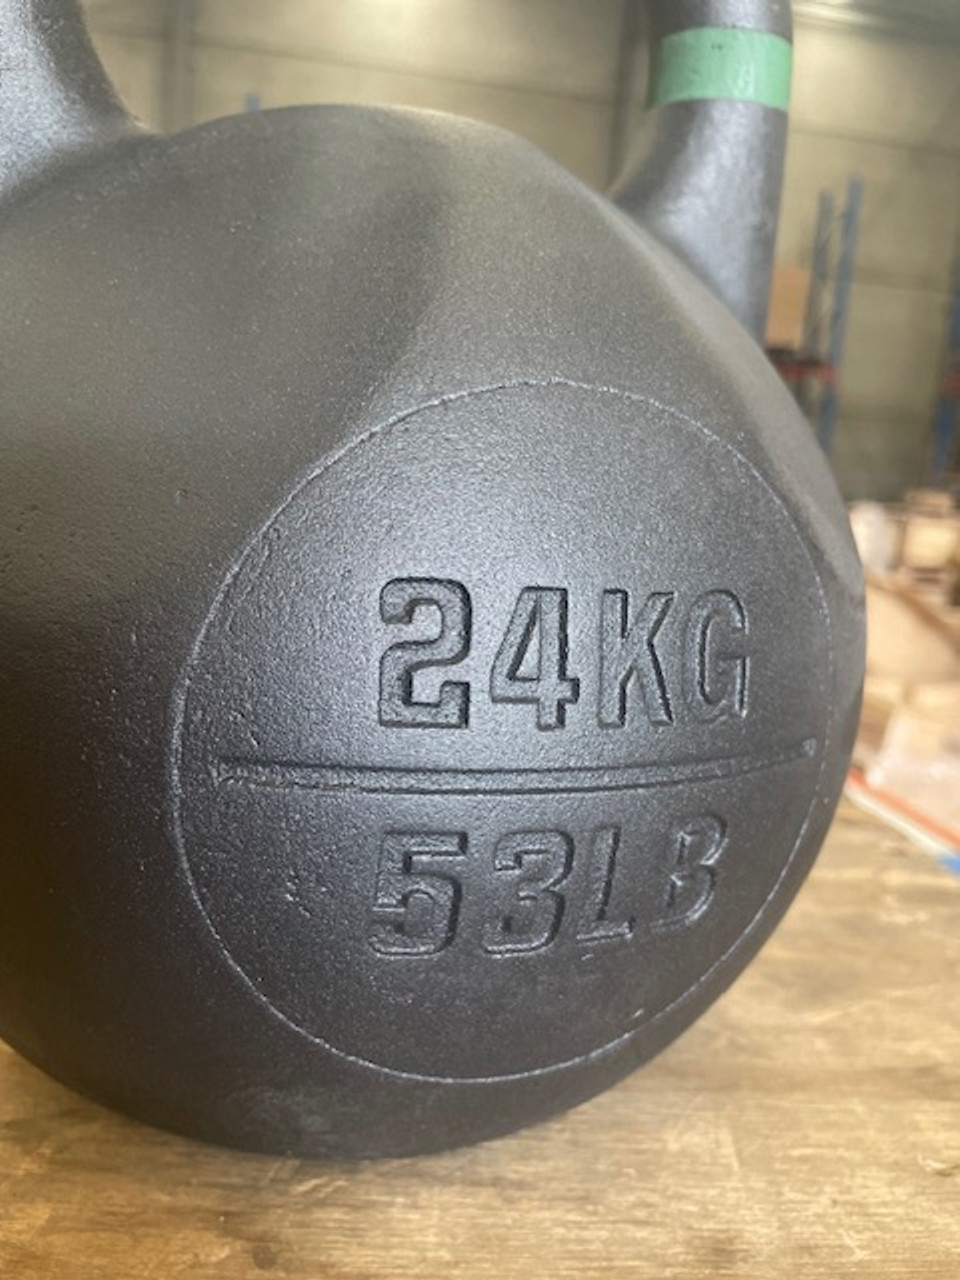 HELLION Competition size powdercoated kettlebell. Ergonomic design.  24kg - PICKUP ONLY.